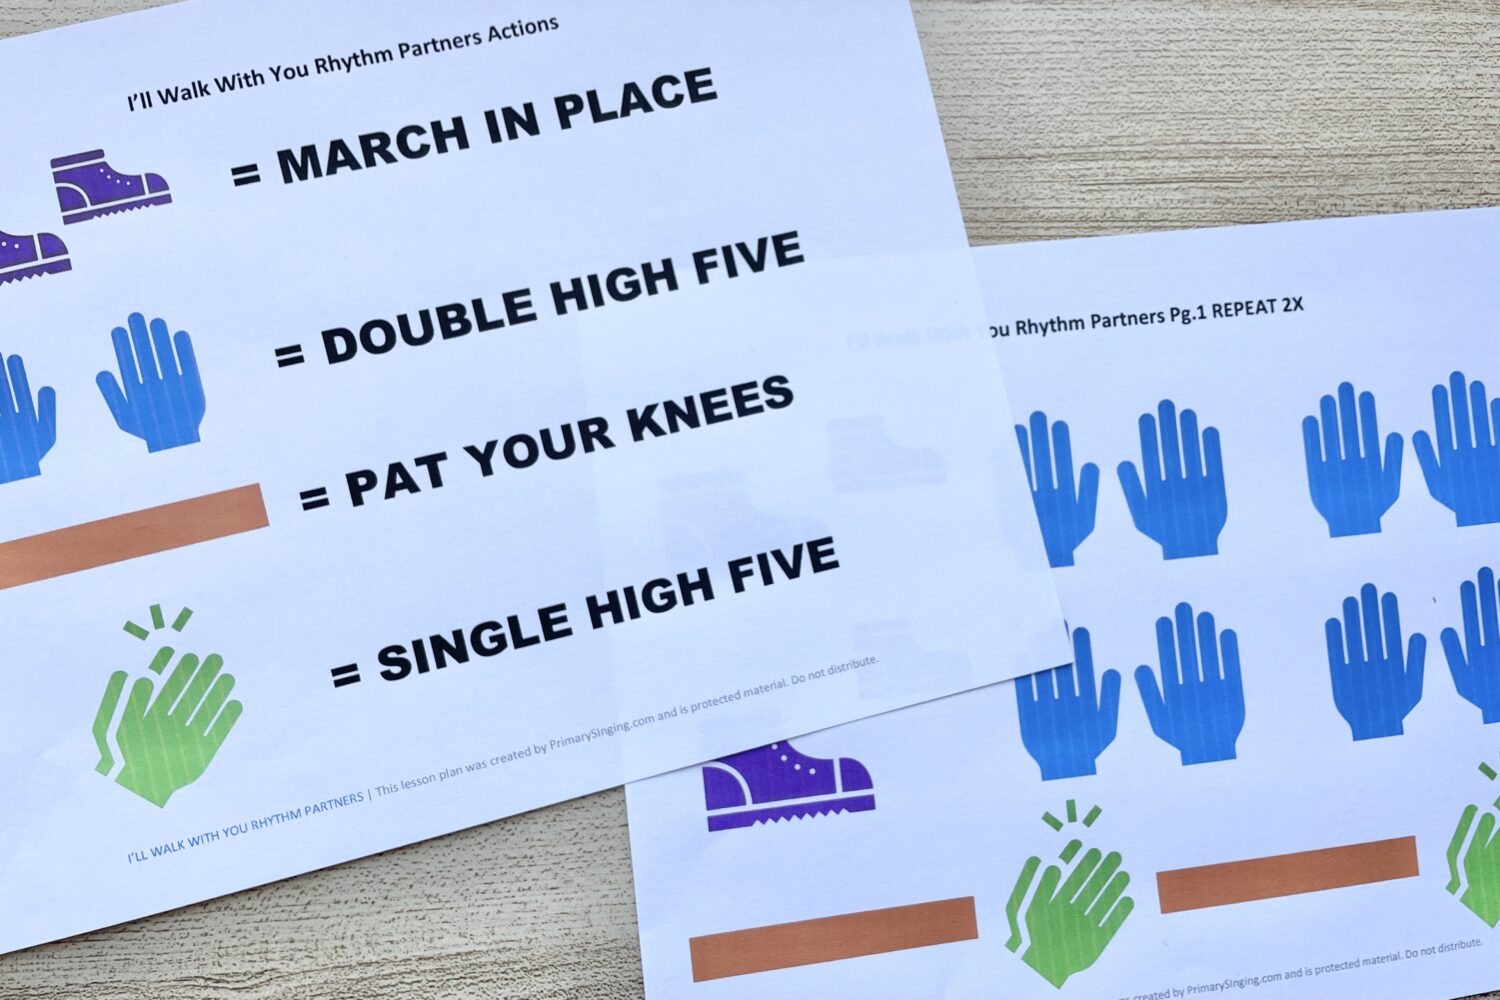 I'll Walk With You Rhythm Partners - people interactions singing time activity with movement actions with printable song helps for LDS Primary Music Leaders.